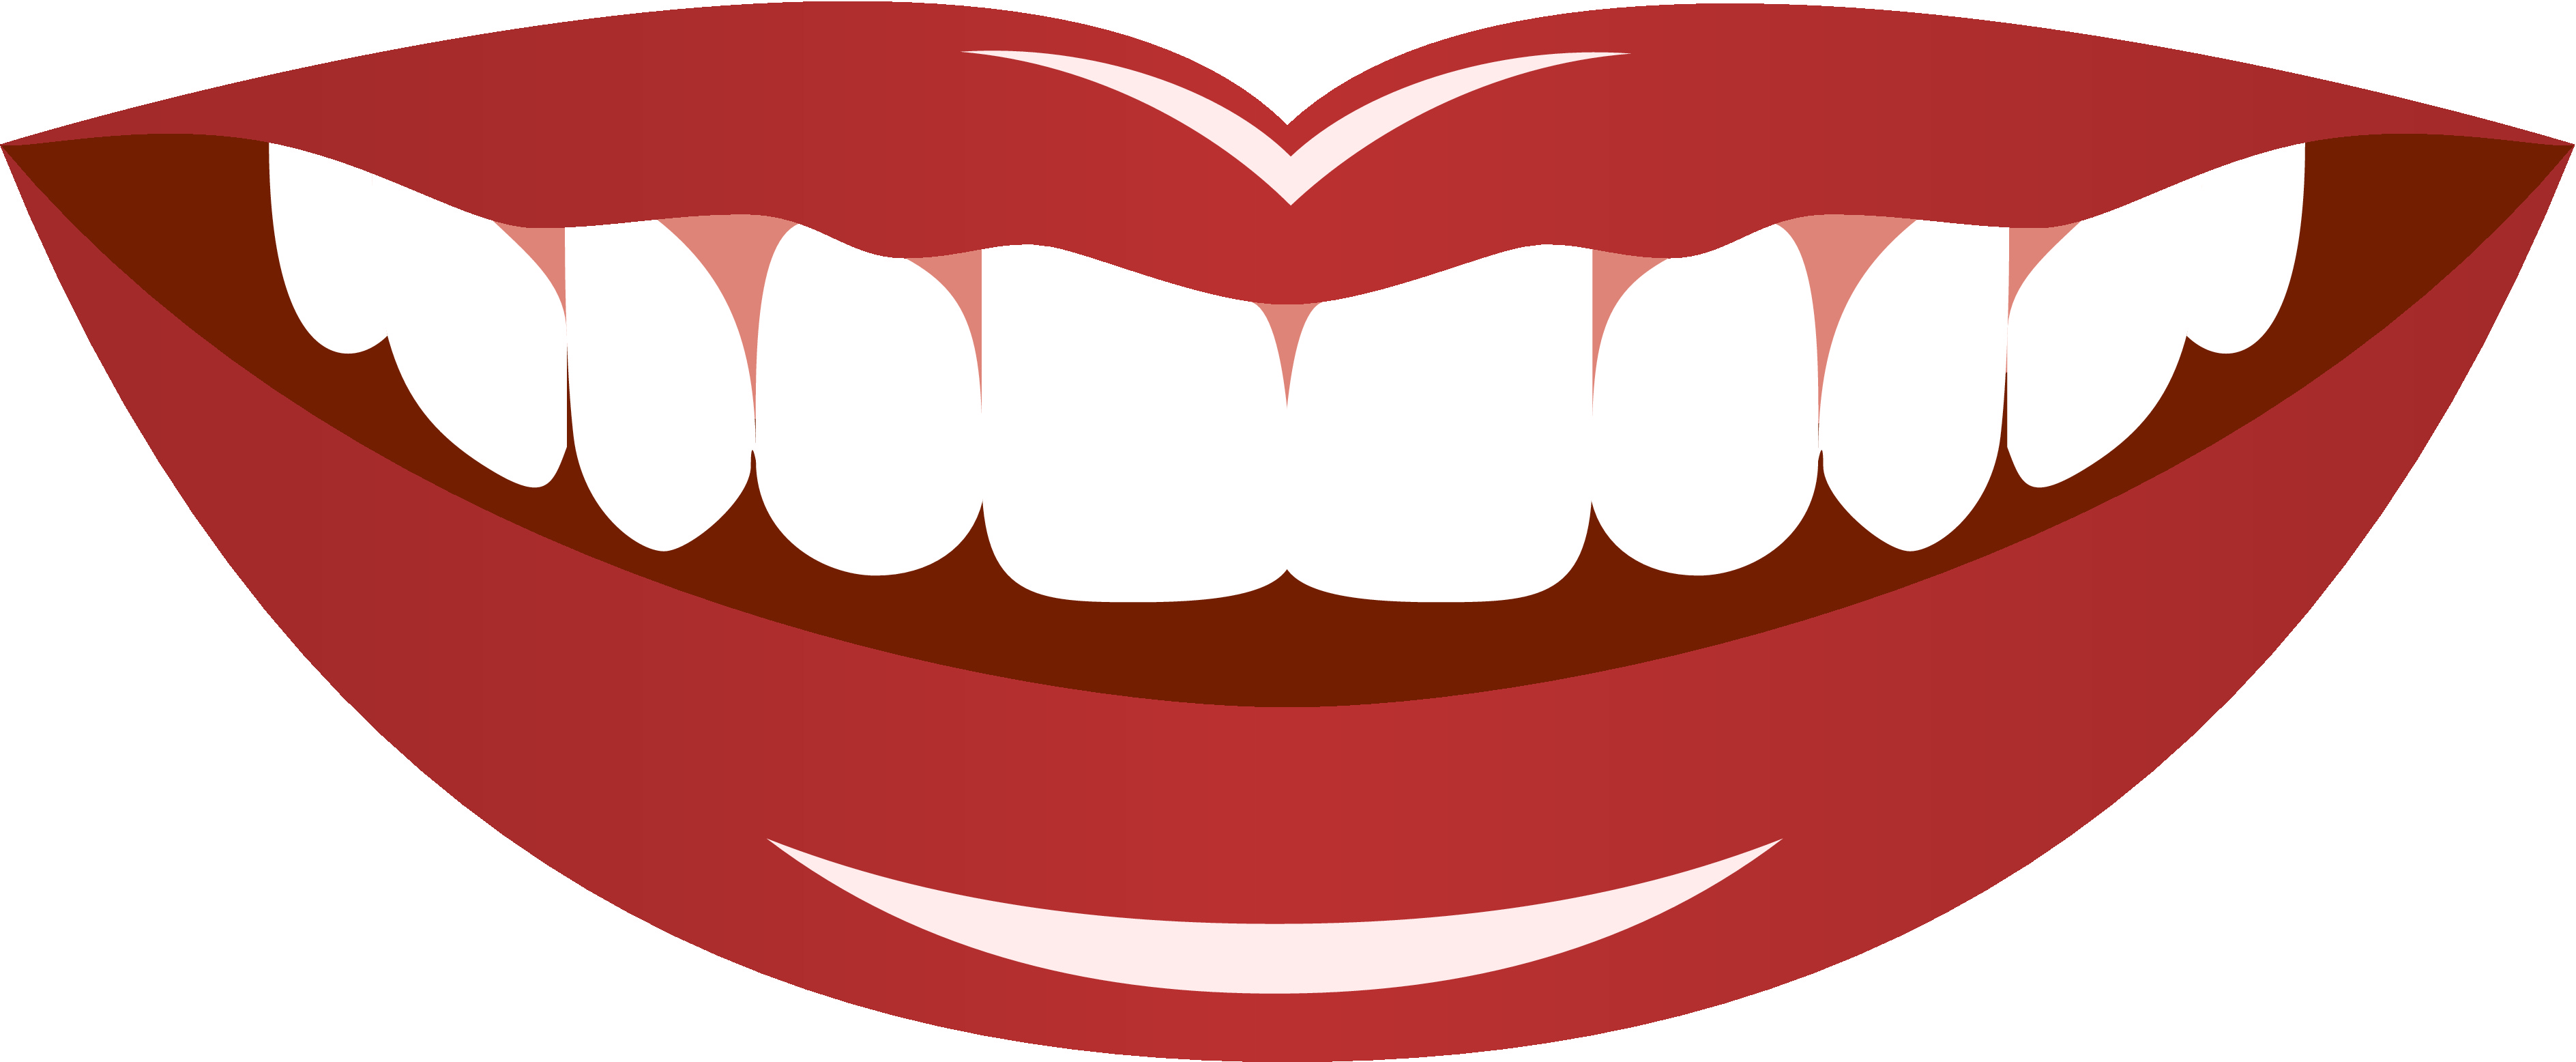 word of mouth clipart - photo #19